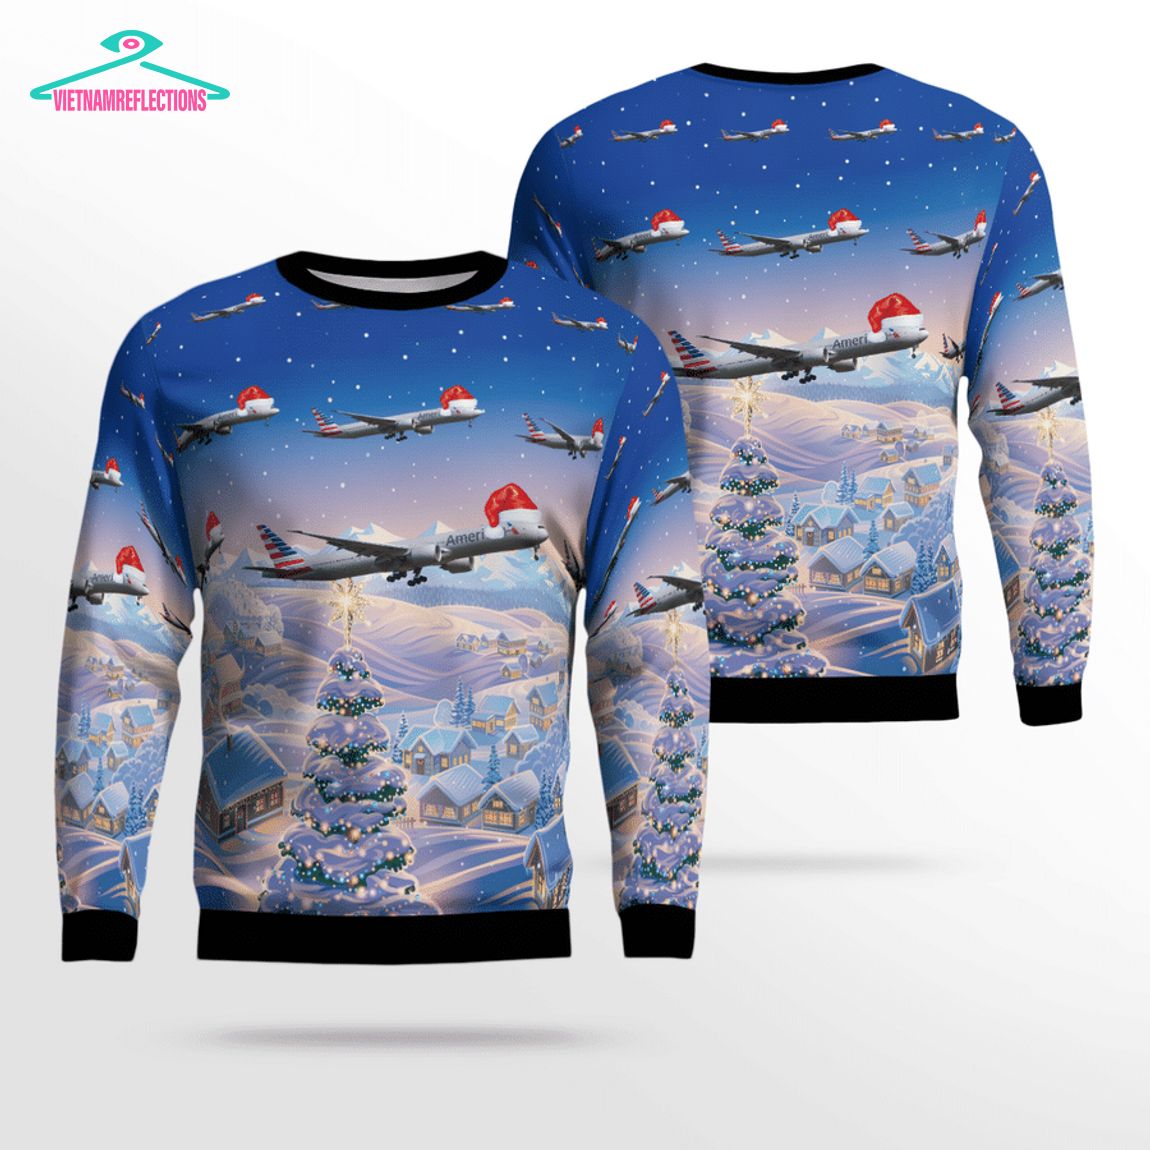 United Airlines Boeing 777-323ER 3D Christmas Sweater - Trending picture dear